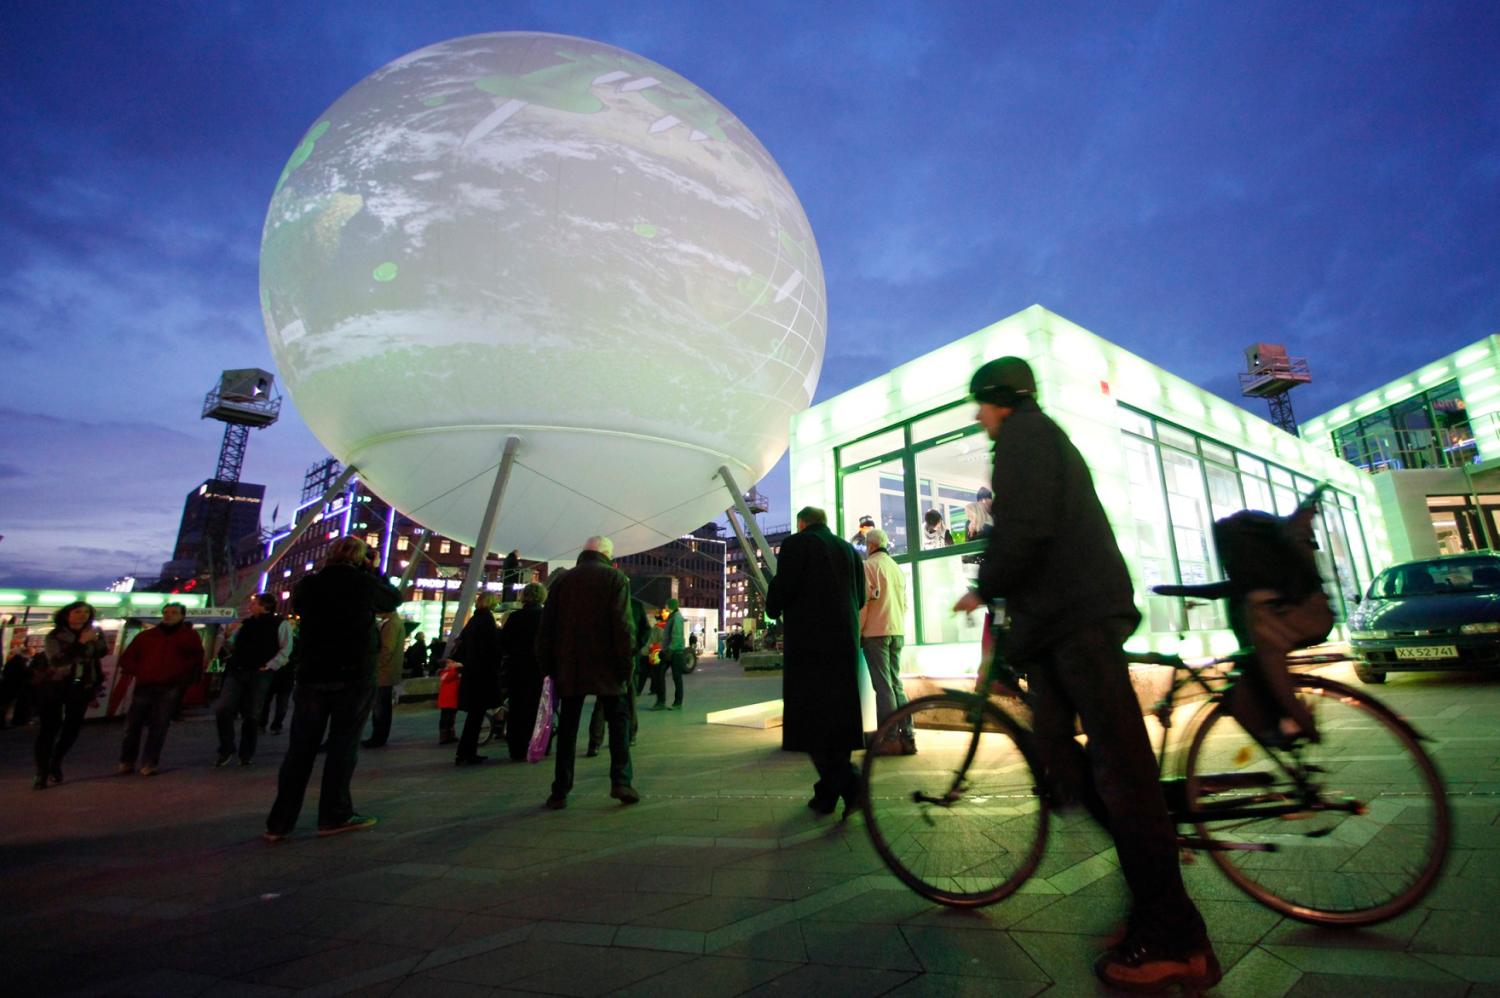 People walk past a large globe featuring an interactive display in central Copenhagen December 8, 2009. Copenhagen is the host city for the United Nations Climate Change Conference 2009, which lasts from December 7 until December 18. REUTERS/Bob Strong  (DENMARK ENVIRONMENT POLITICS SOCIETY) - GM1E5C904WT01